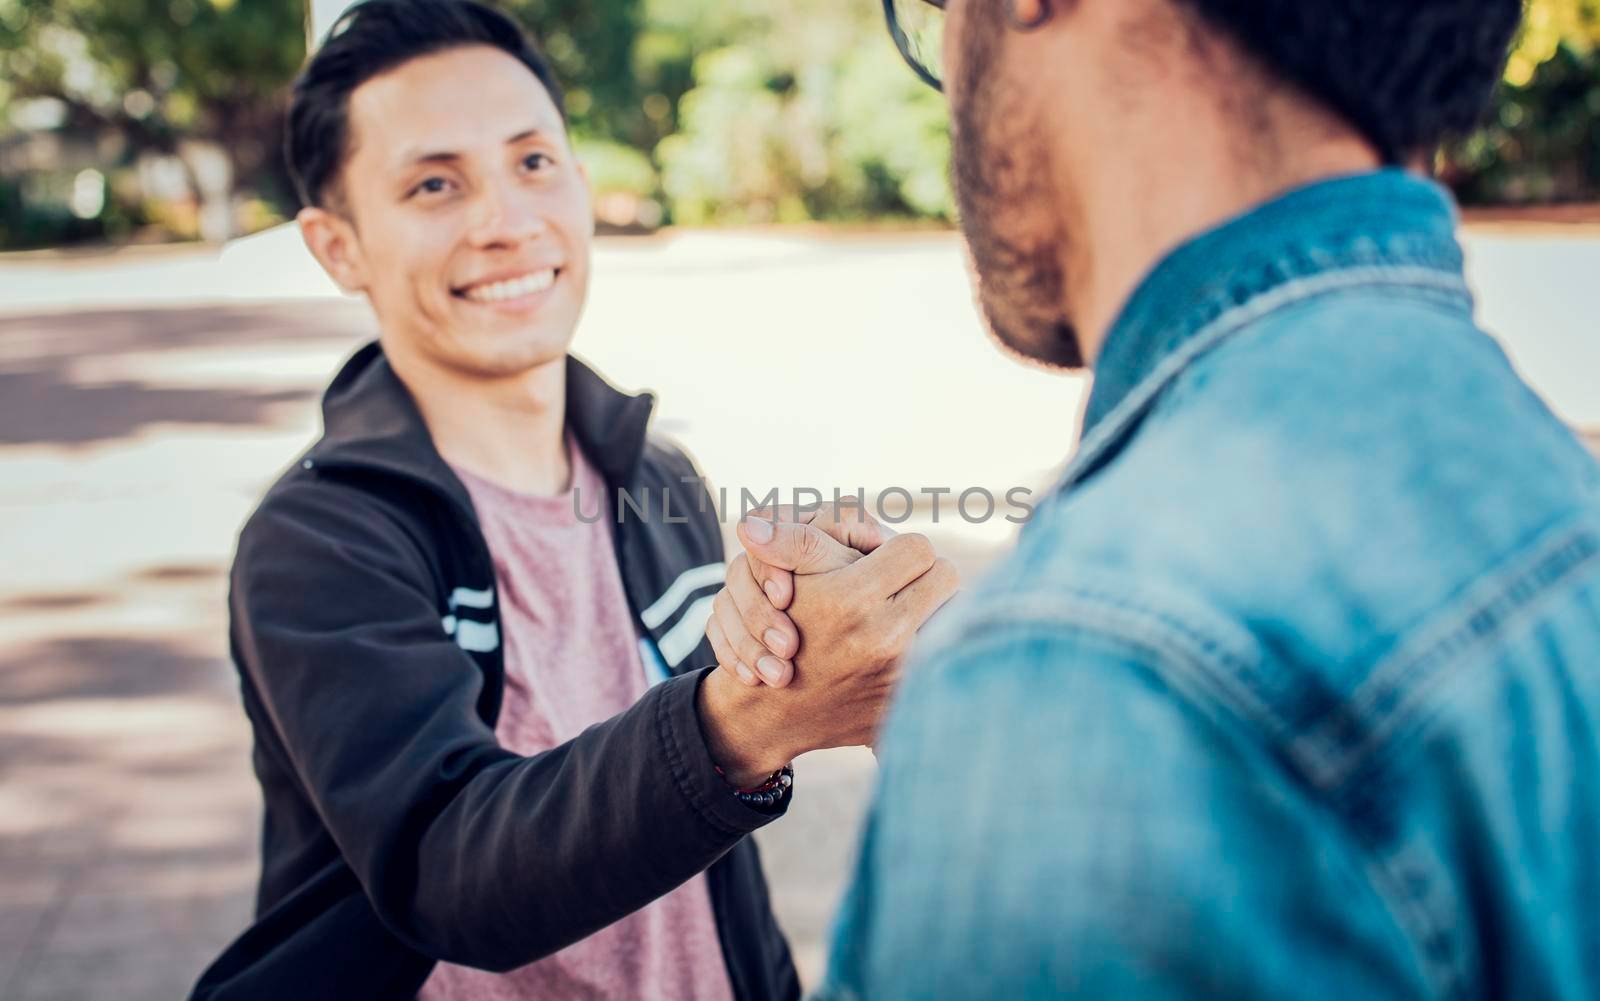 Two teenage friends shaking hands at each other outdoors. Two people shaking hands on the street. Concept of two friends greeting each other with handshake on the street by isaiphoto